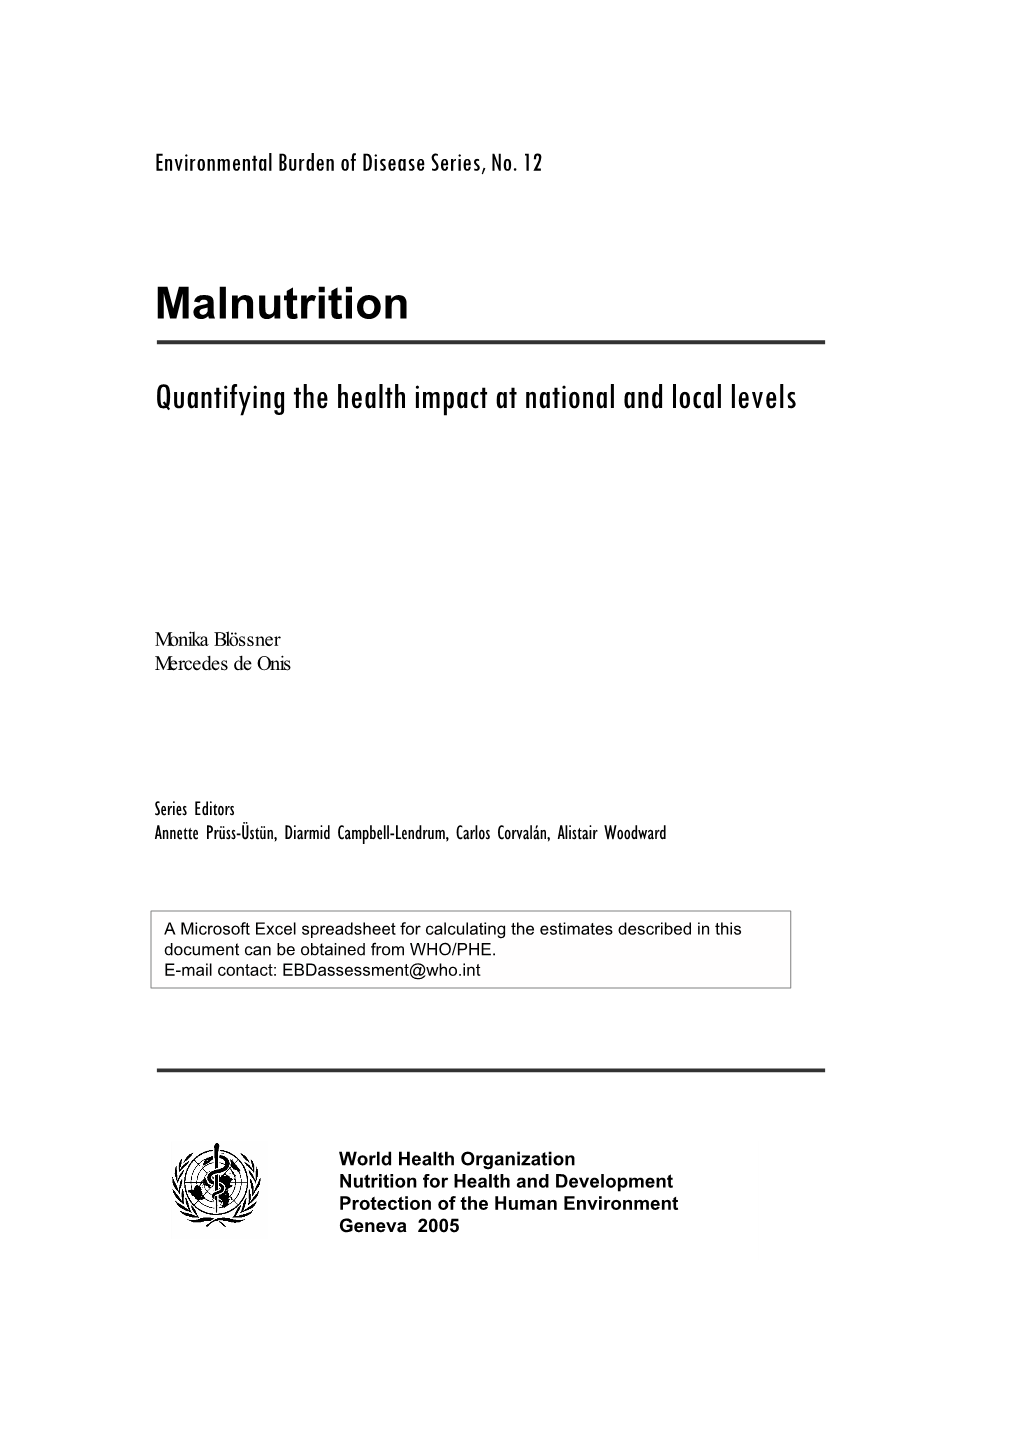 Malnutrition: Quantifying the Health Impact at National and Local Levels